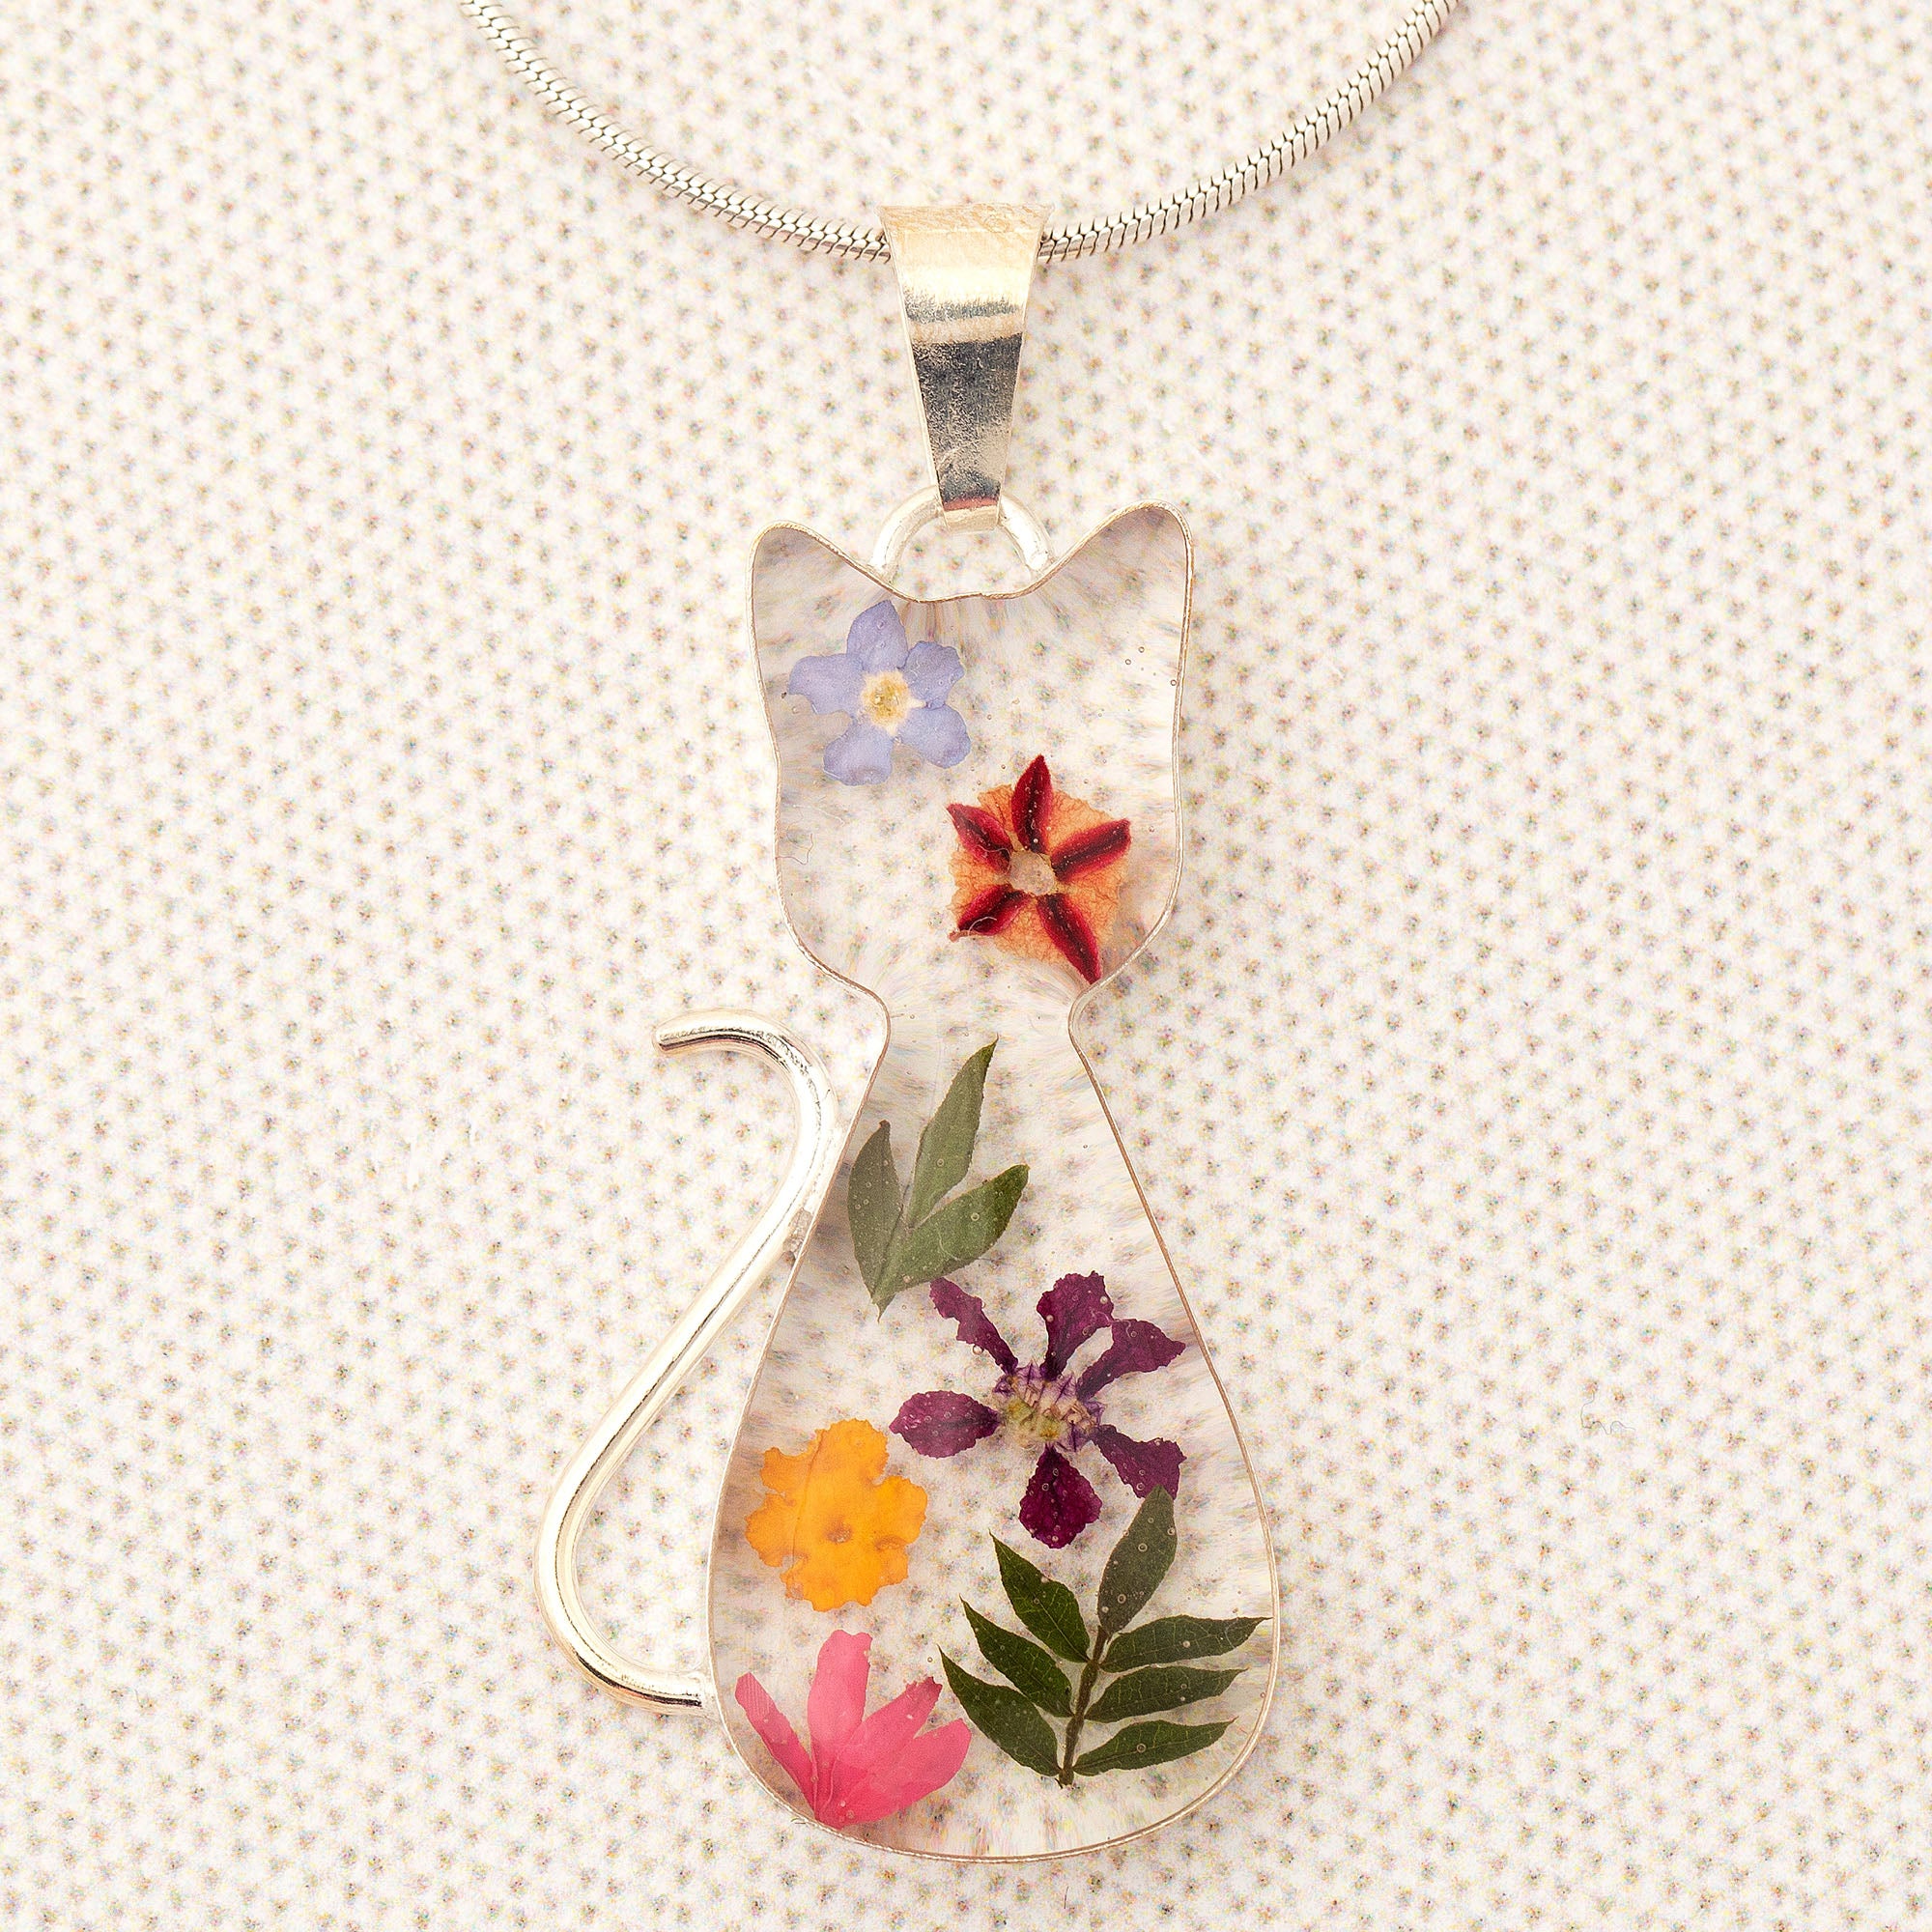 Real Flowers & Sterling Cat Necklace - With Sterling Cable Chain